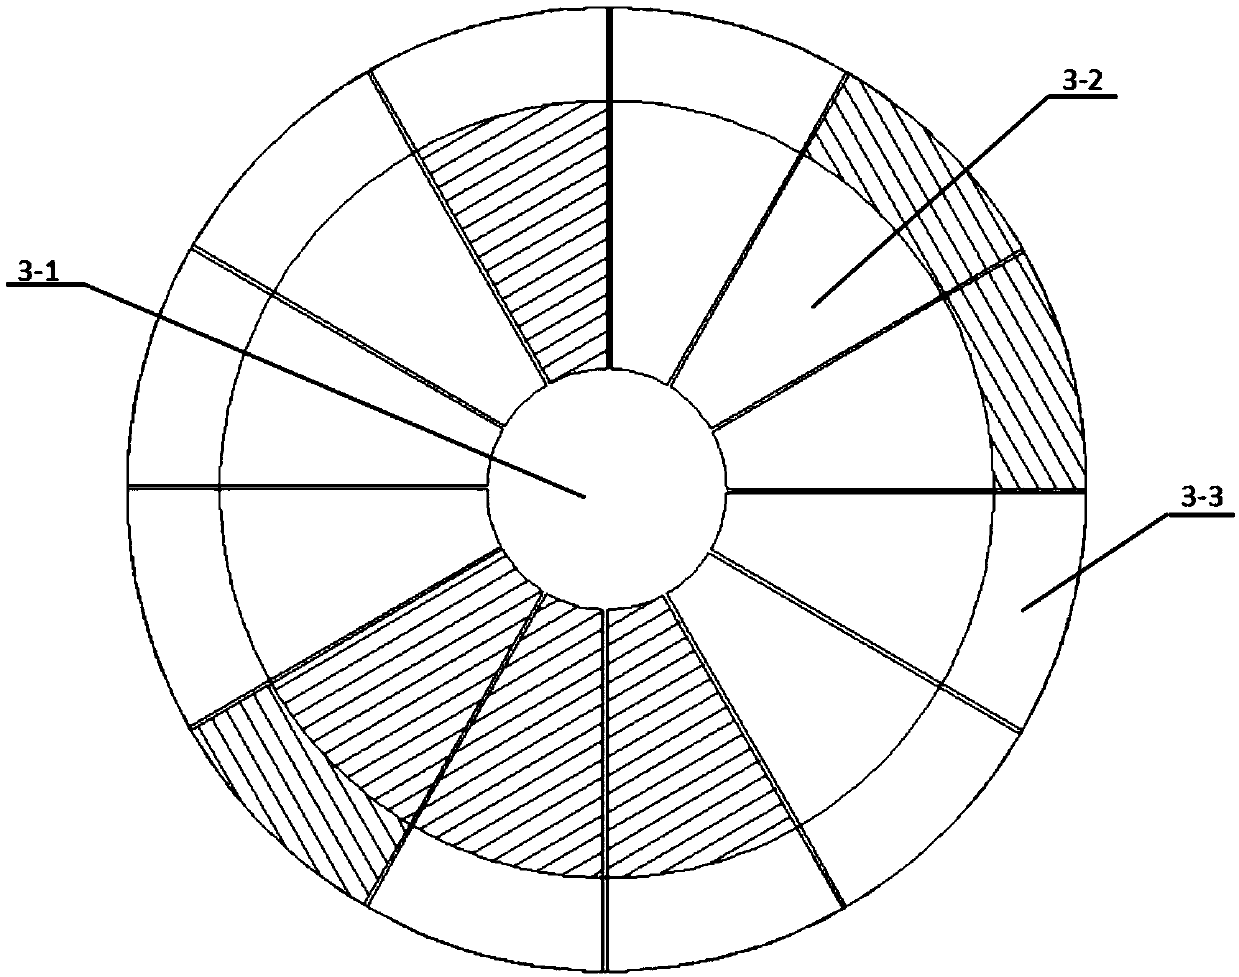 design method for vibration damping of a TBM cutter head